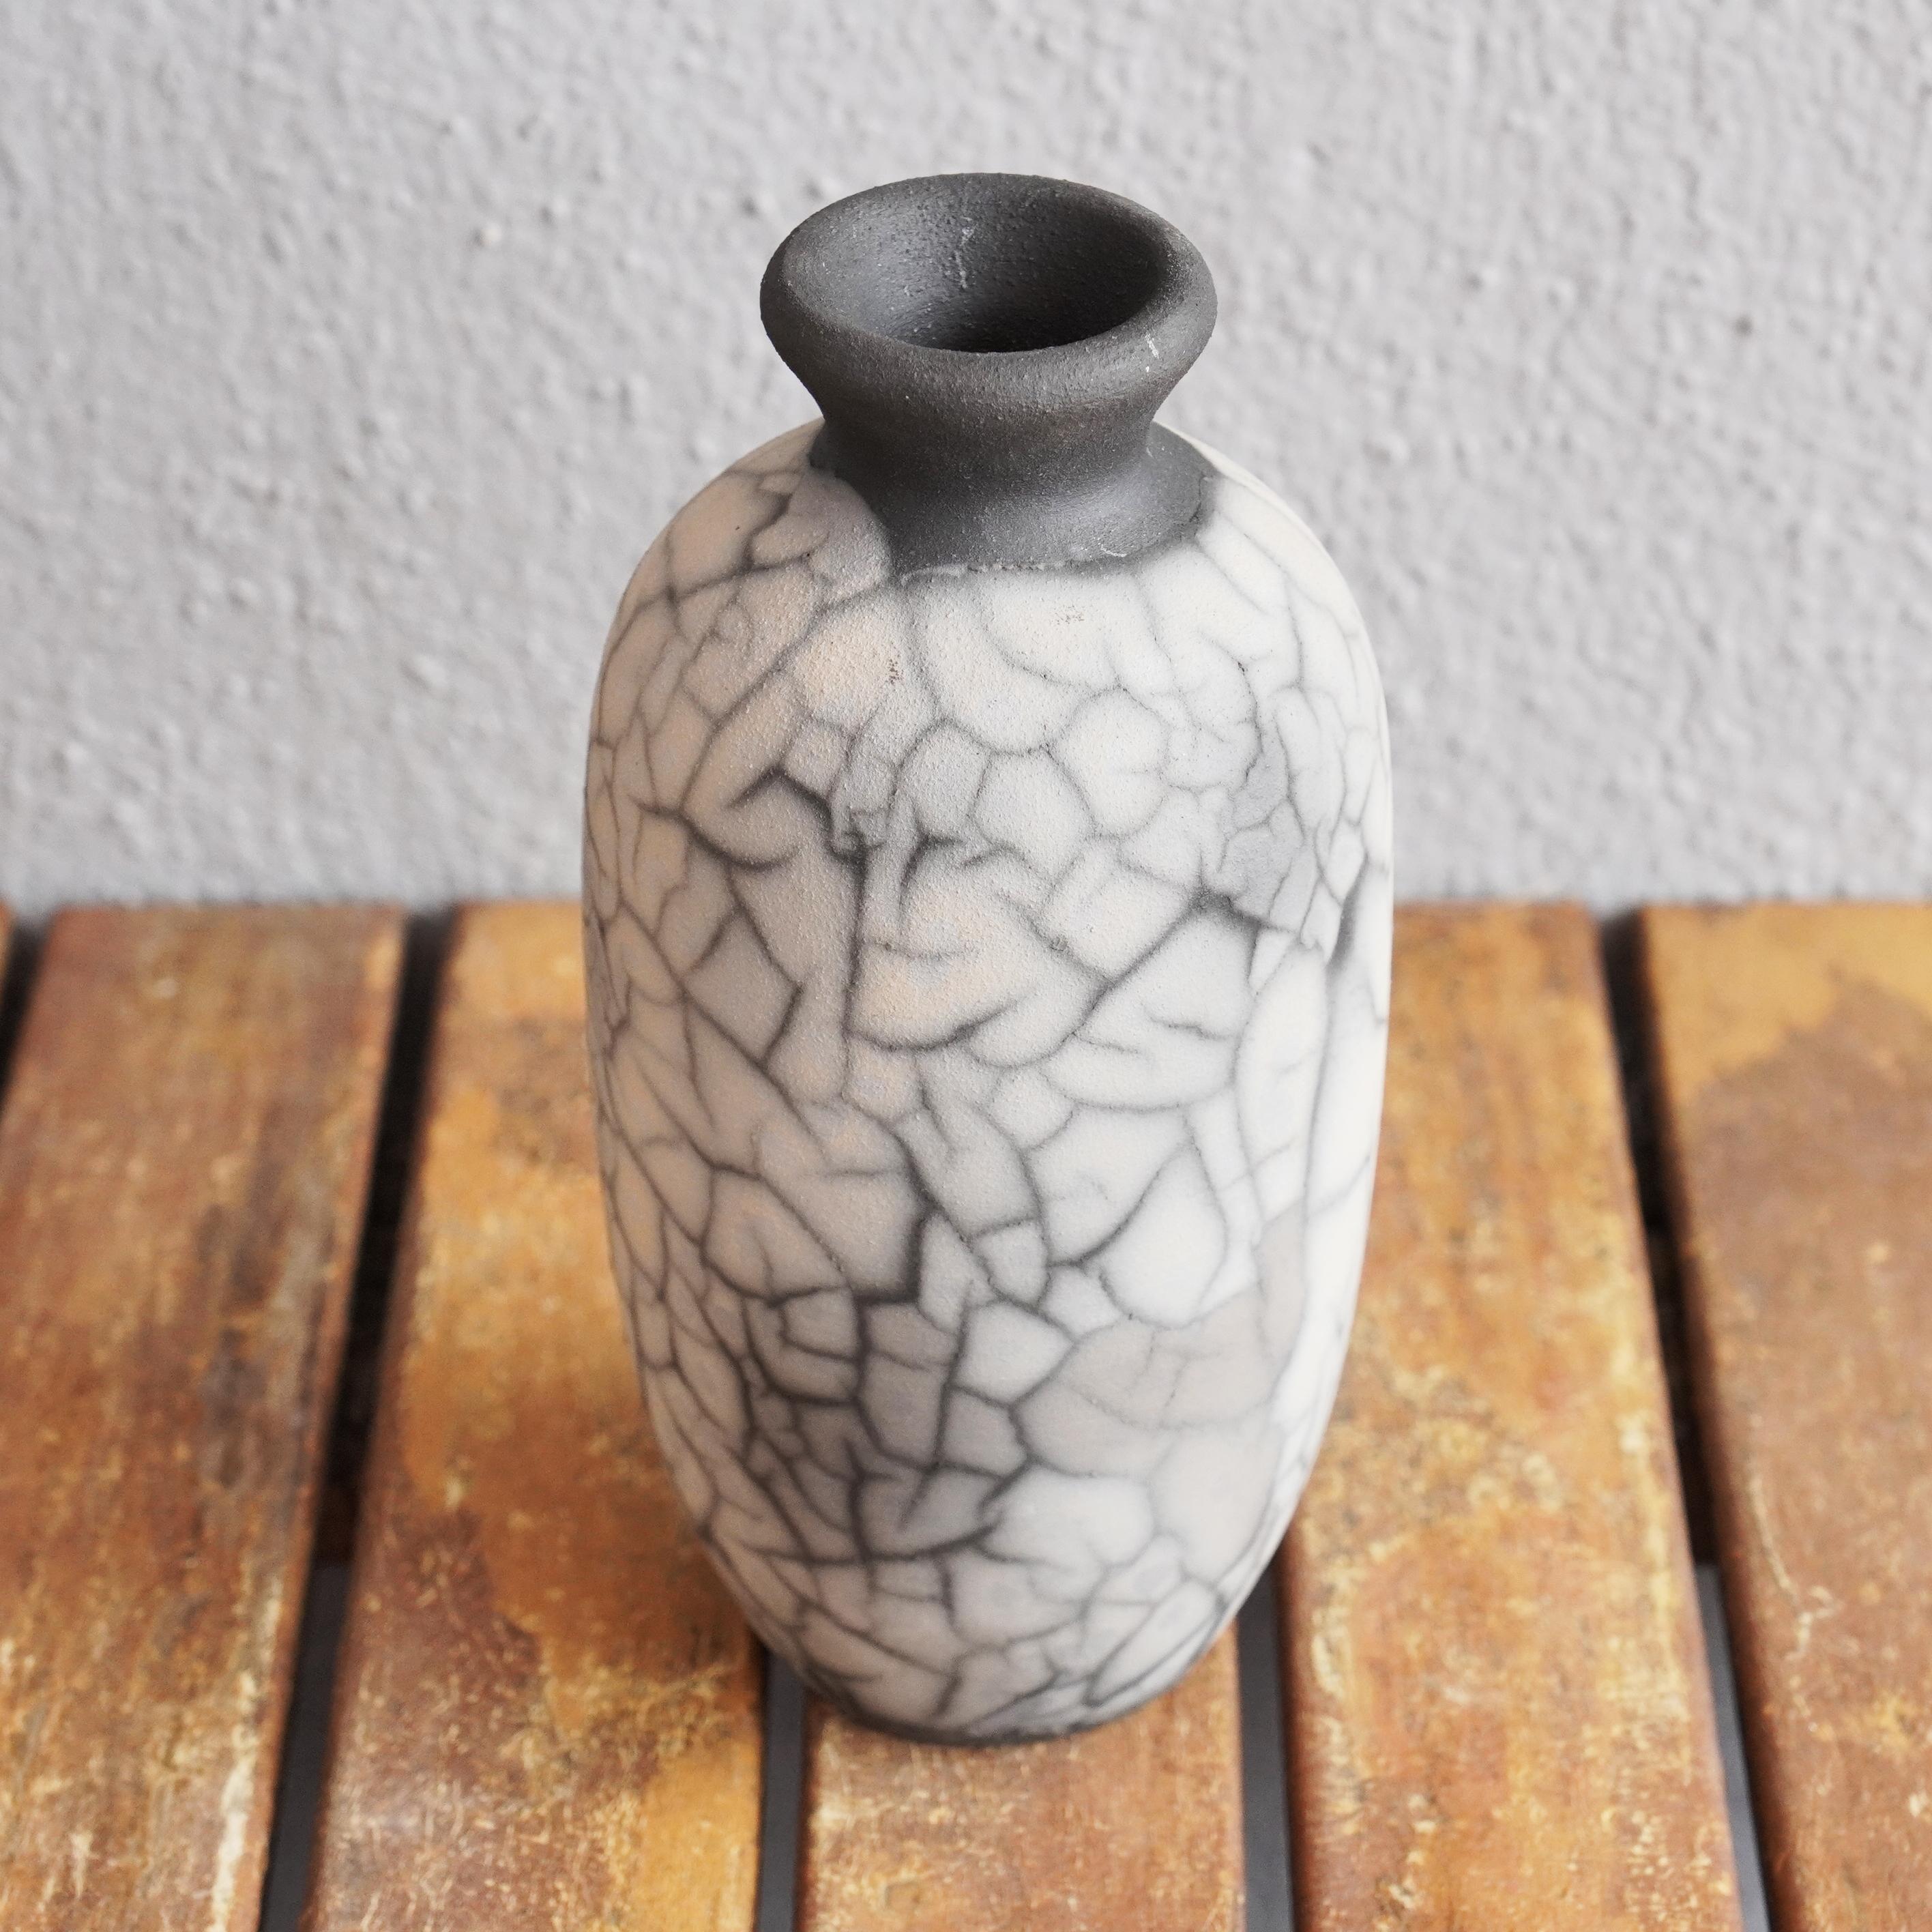 Koban ( 小判 ) - (n) oval

NEW AND IMPROVED : This vase comes with a waterproof tube insert for fresh flowers and cuttings. Insert width is 2cm/0.8 inches wide

The Koban vase is a classic bottle vase with an oval shape and narrow mouth. It’s the